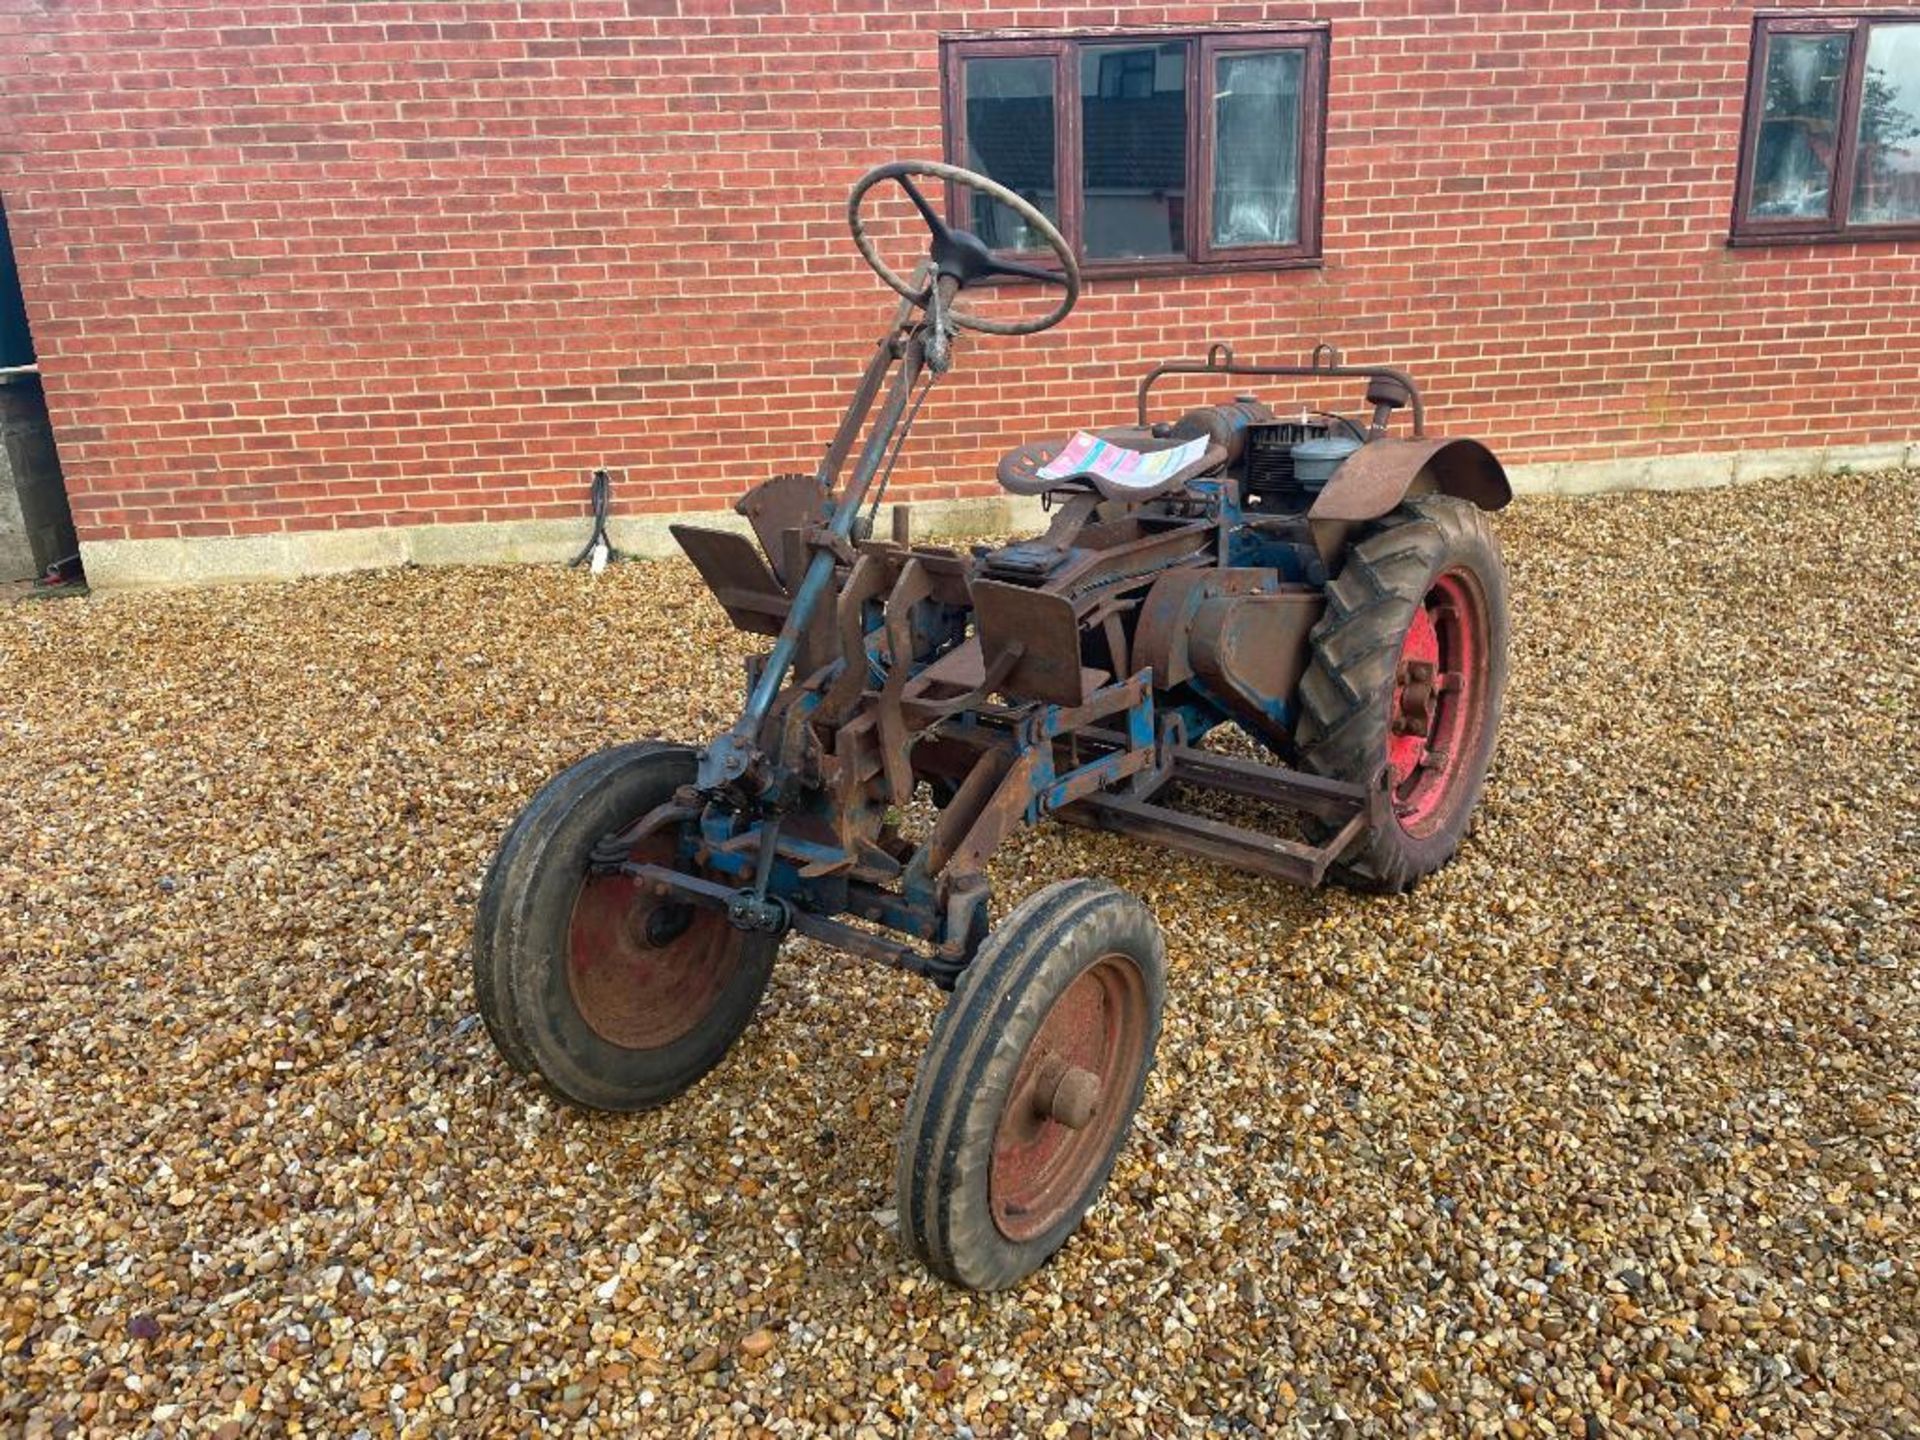 1949 Garner Light Tractor 2wd petrol tractor with JAP Model S air cooled engine on 7.50-16 front and